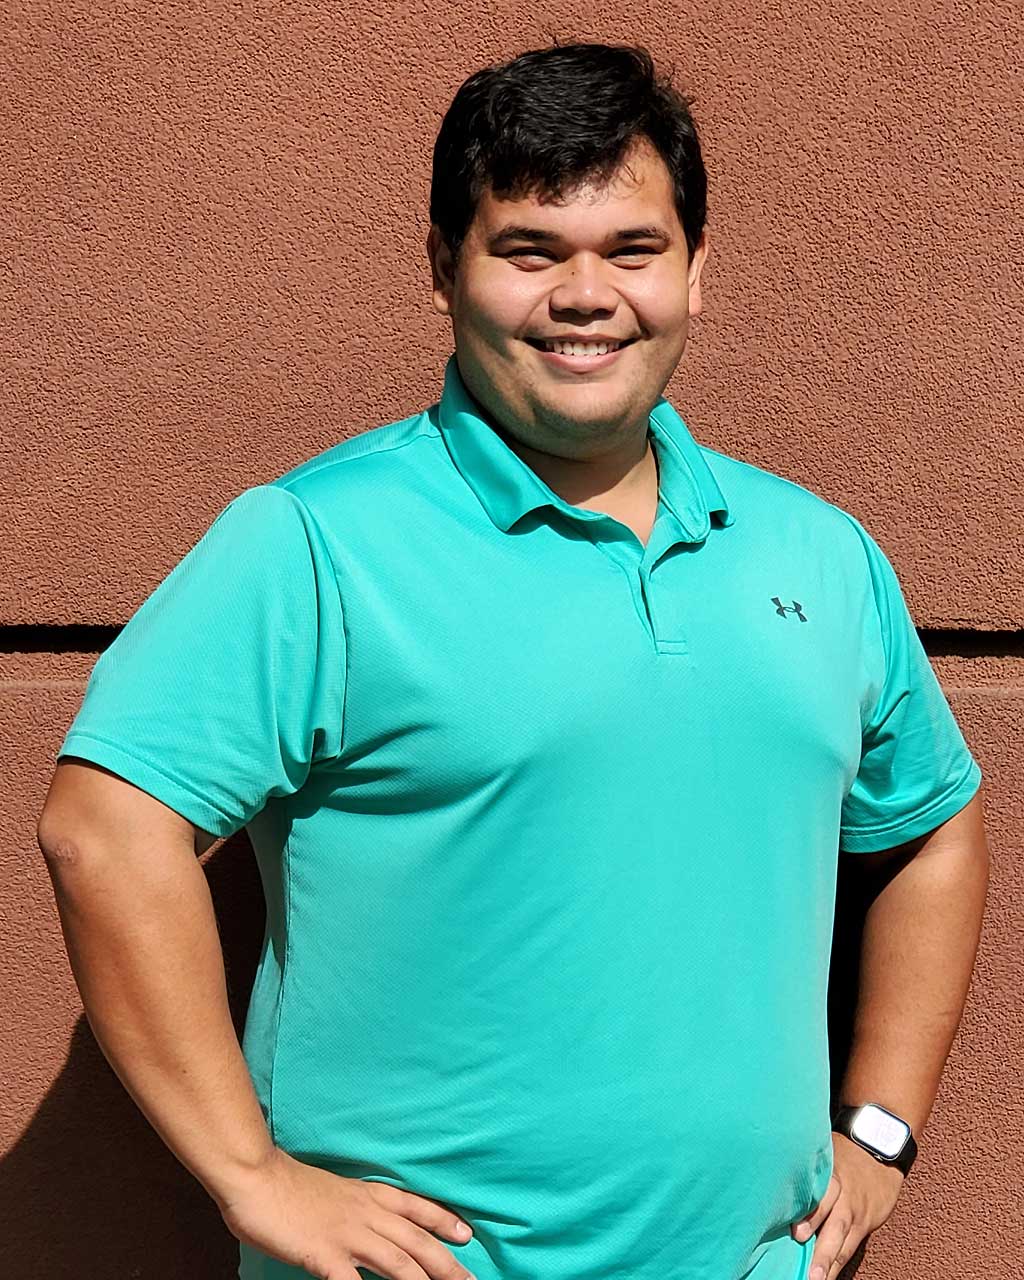 A Vansant & Gusler engineering professional wearing a polo shirt